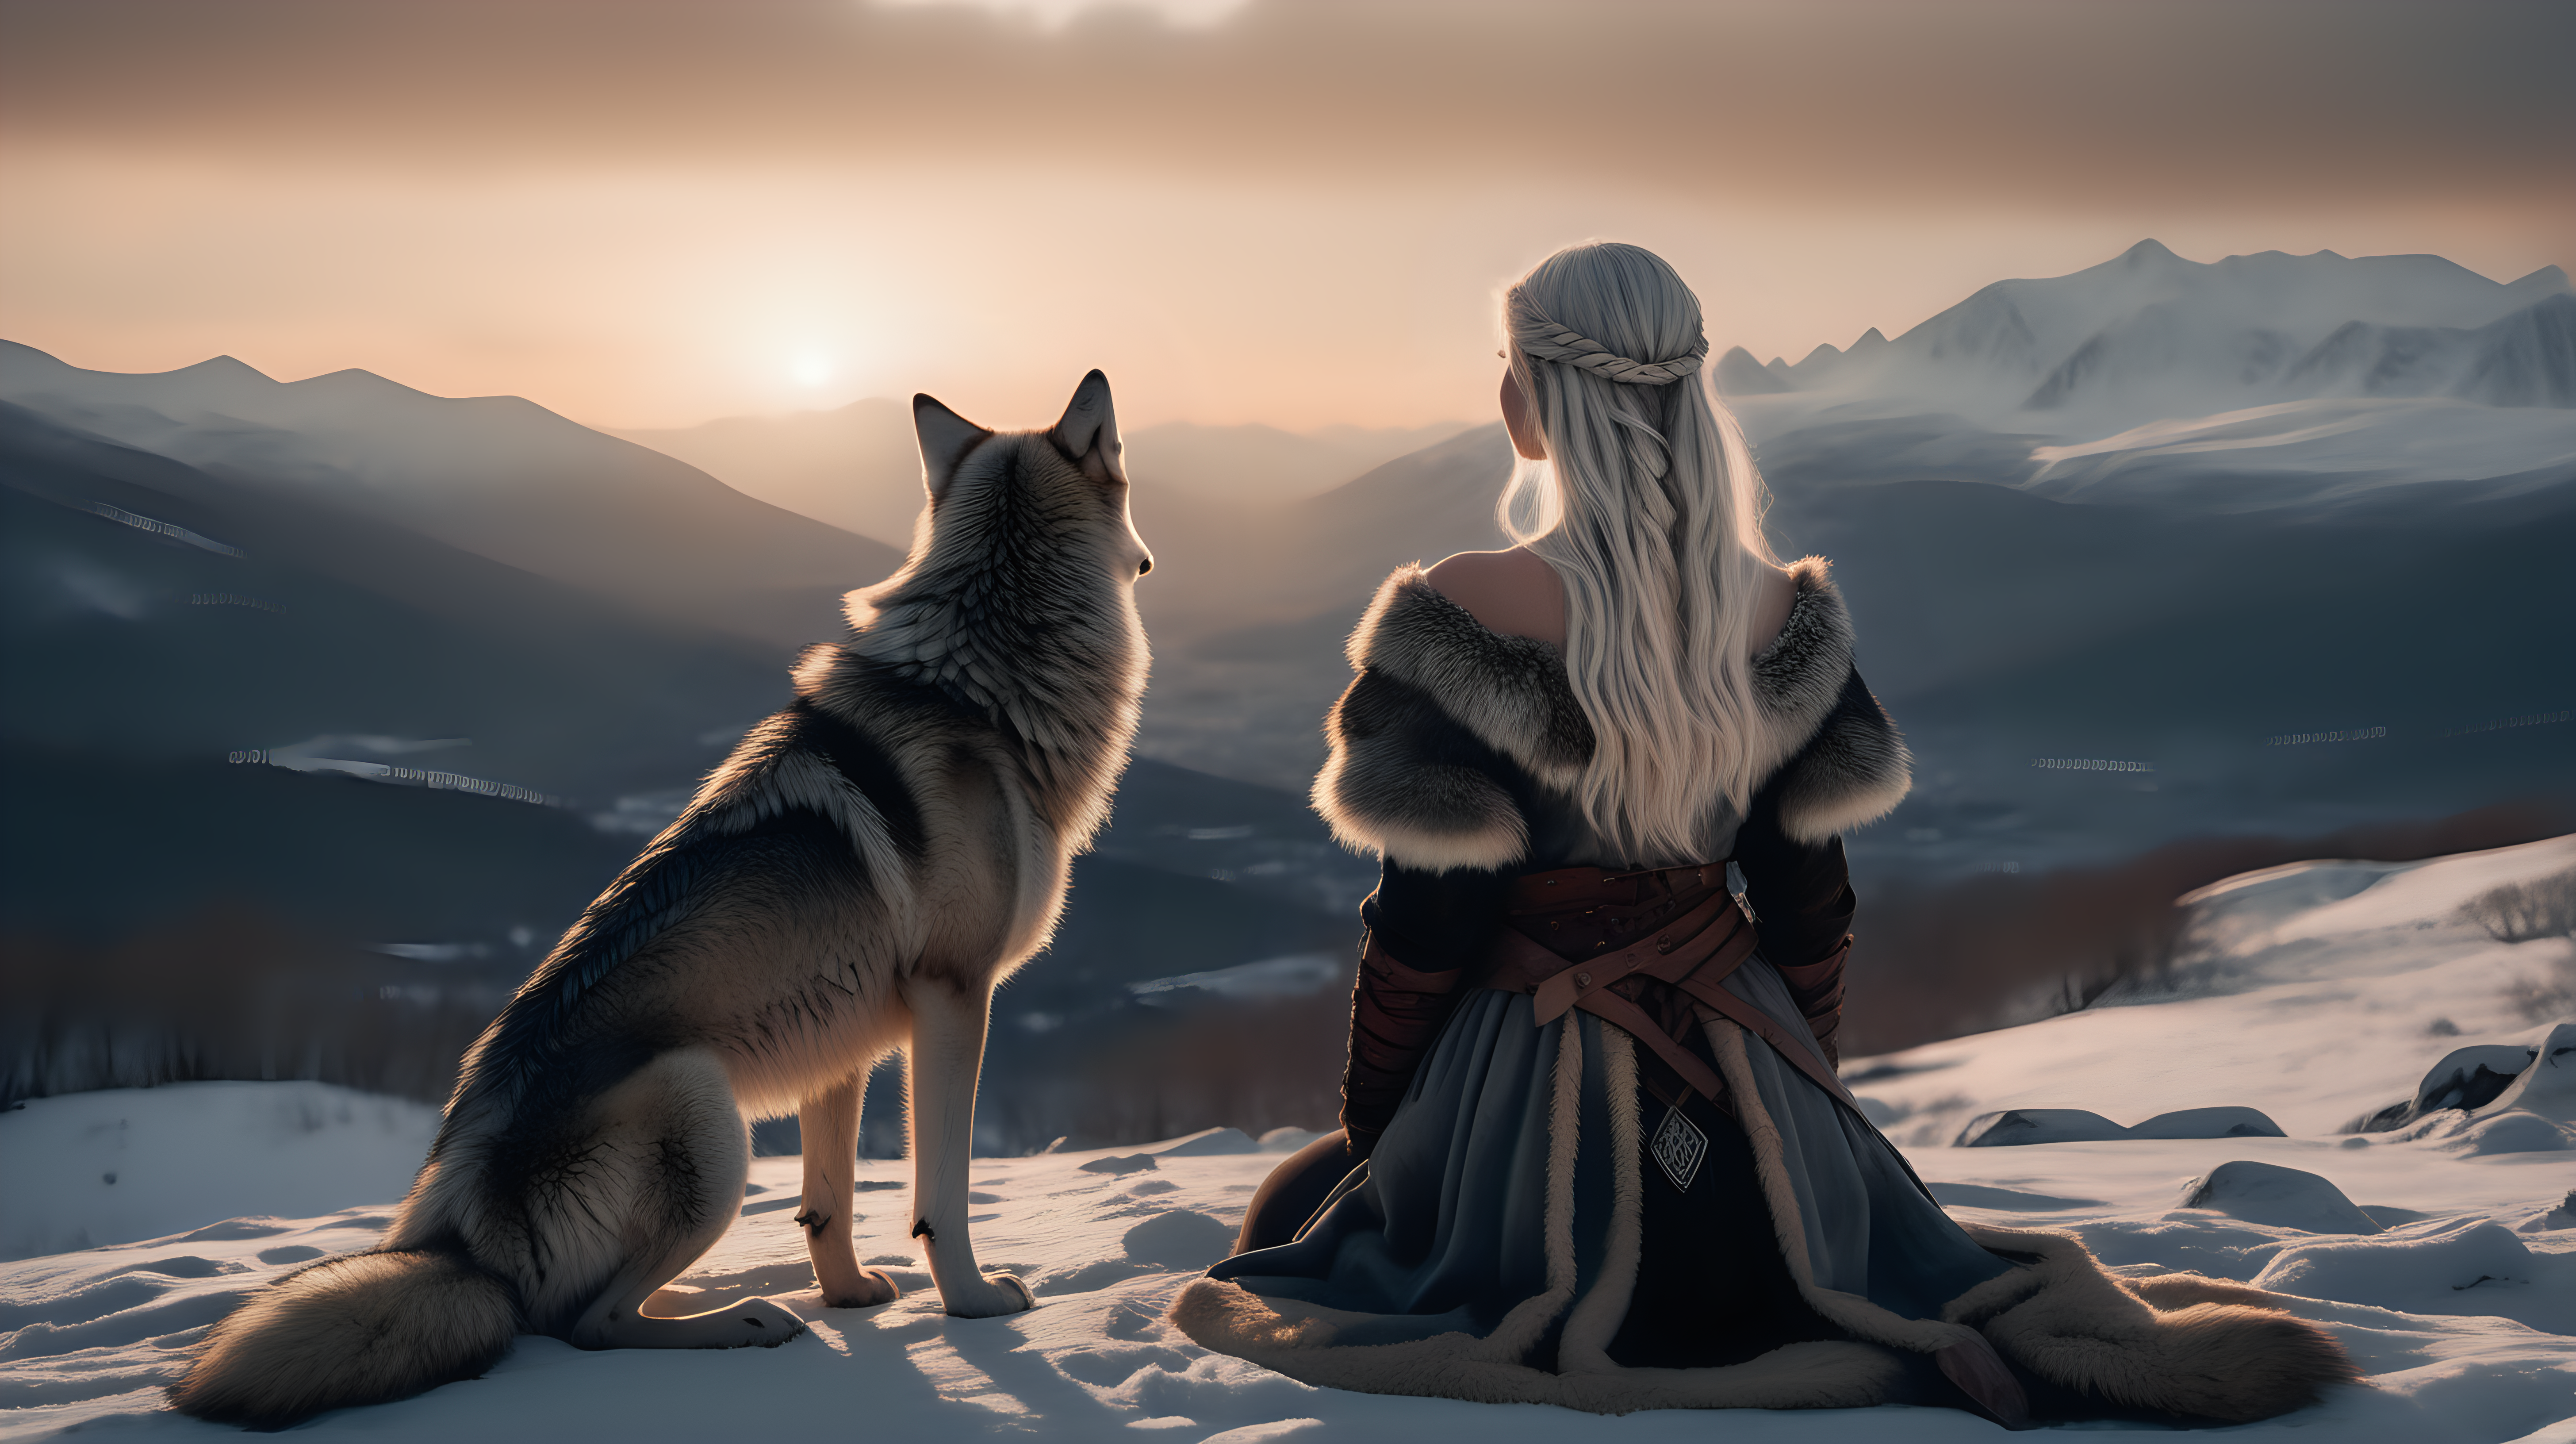 the photo is taken in snowy landscape with mountains in the distance sunset. one beauty girl is standing, a wolf is sitting on her side. both are watching to the mountains. The photo was take from behind them. The girl is wearing viking indumentary, without weapons, white straight hair. The lighting in the portrait should be dramatic. Sharp focus. A ultrarealistic perfect example of cinematic shot. Use muted colors to add to the scene.